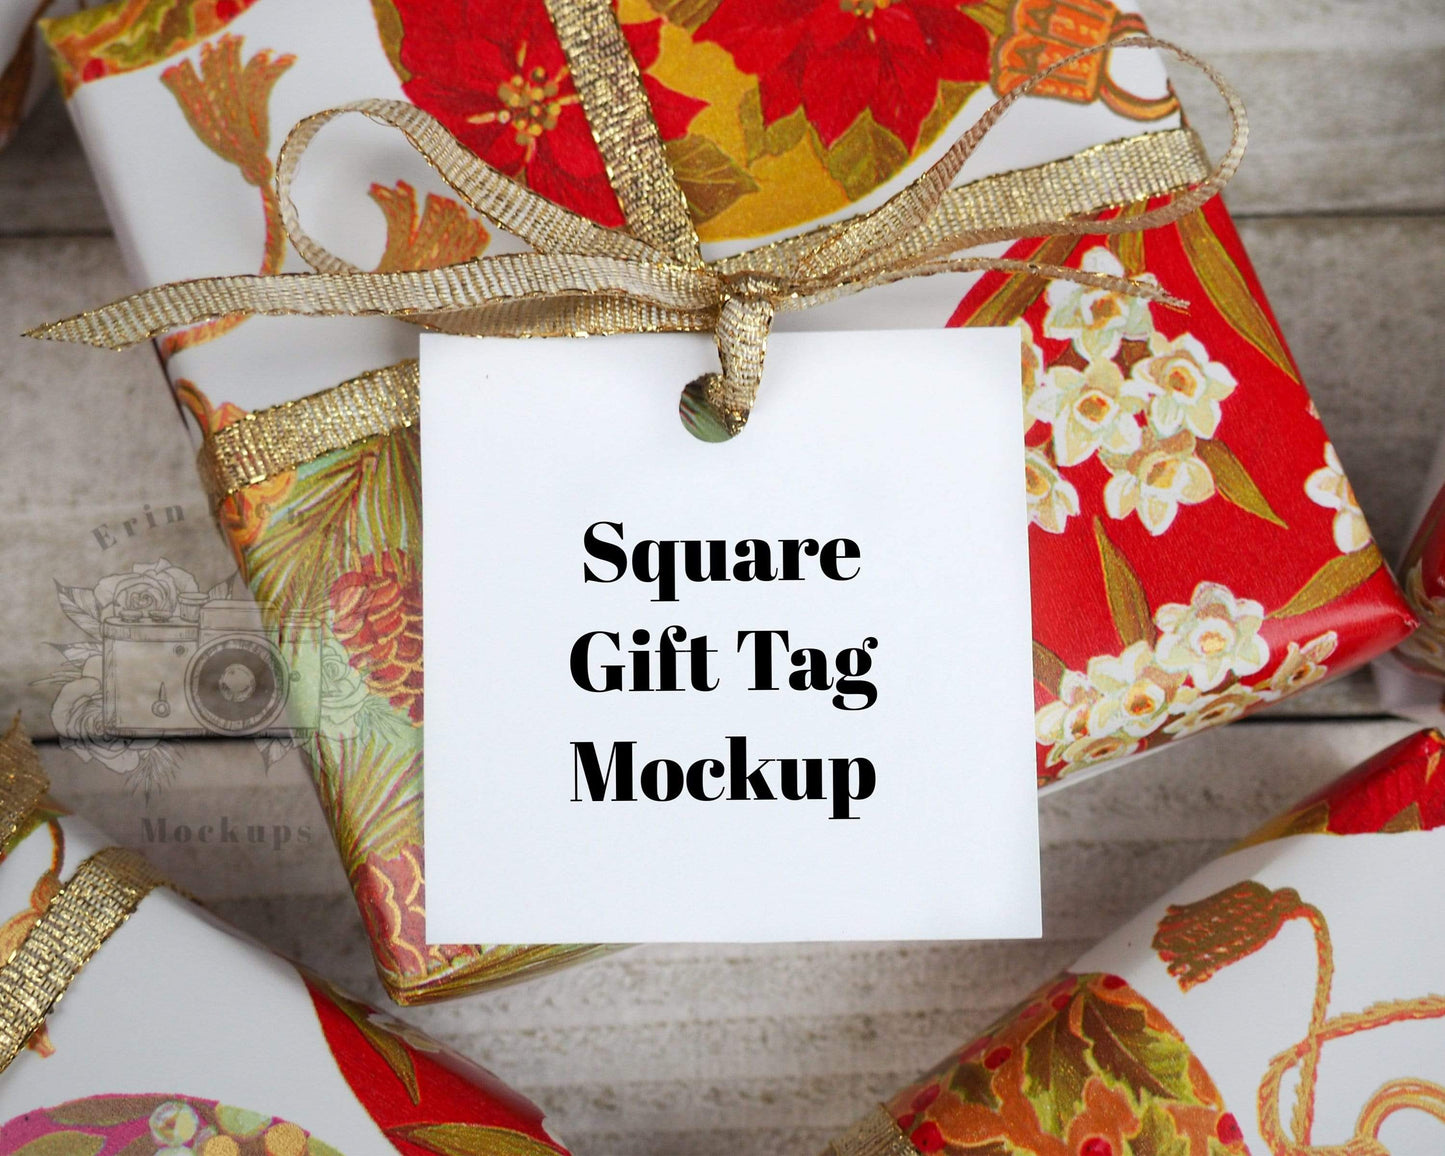 Erin Plewes Mockups Square gift tag mockup, Christmas label mock up for presents and Wedding stock photography, Jpeg Instant Digital Download